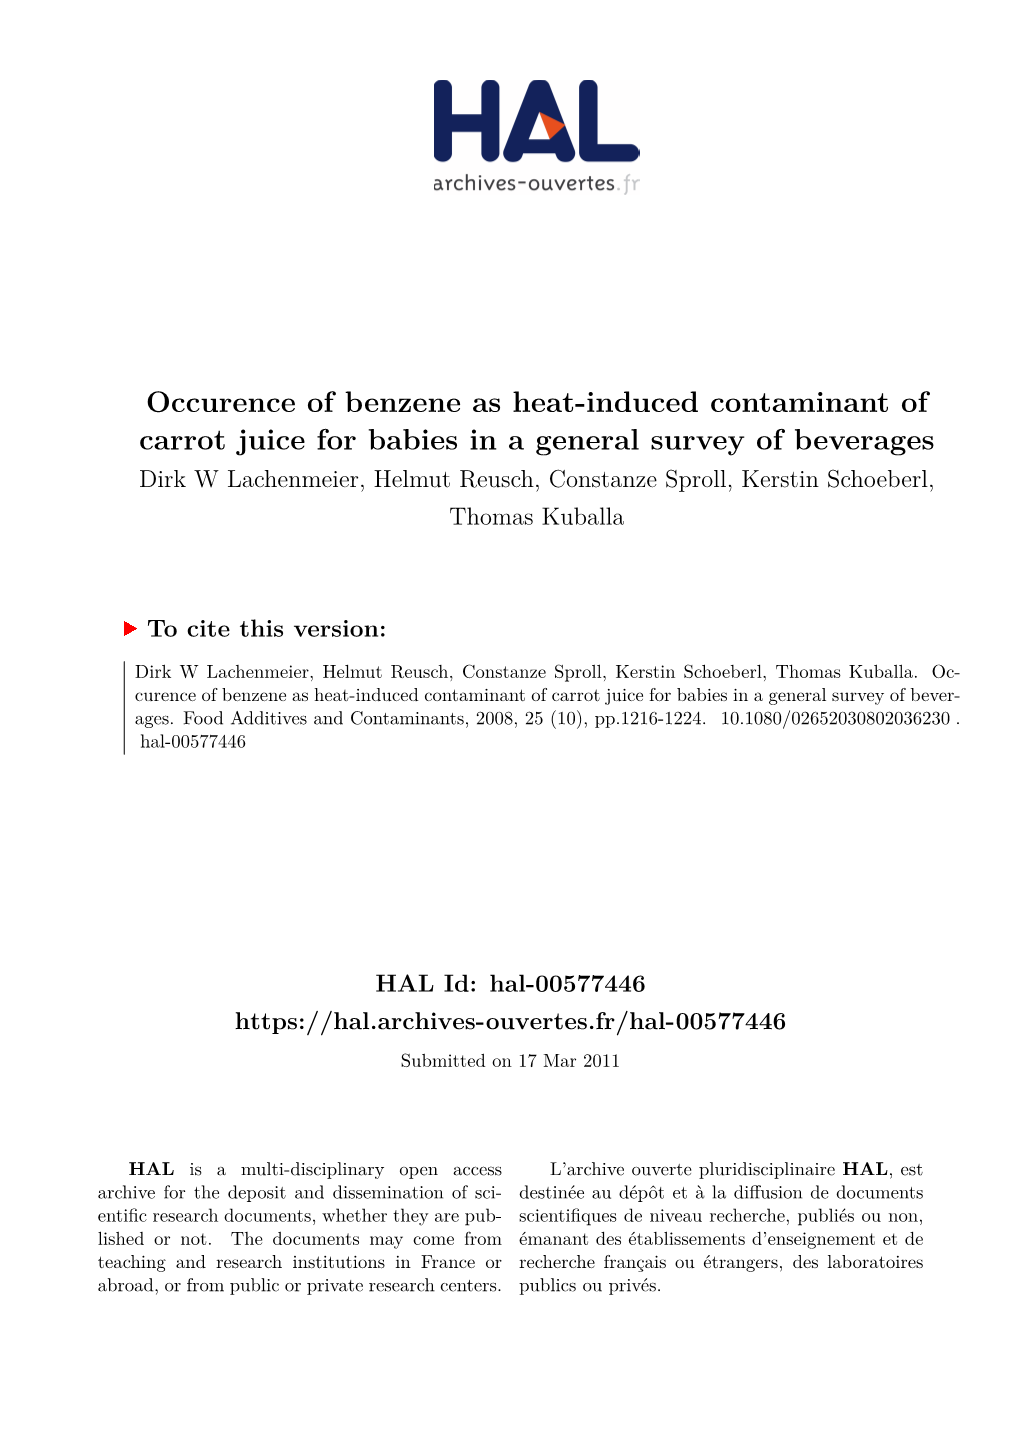 Occurence of Benzene As Heat-Induced Contaminant of Carrot